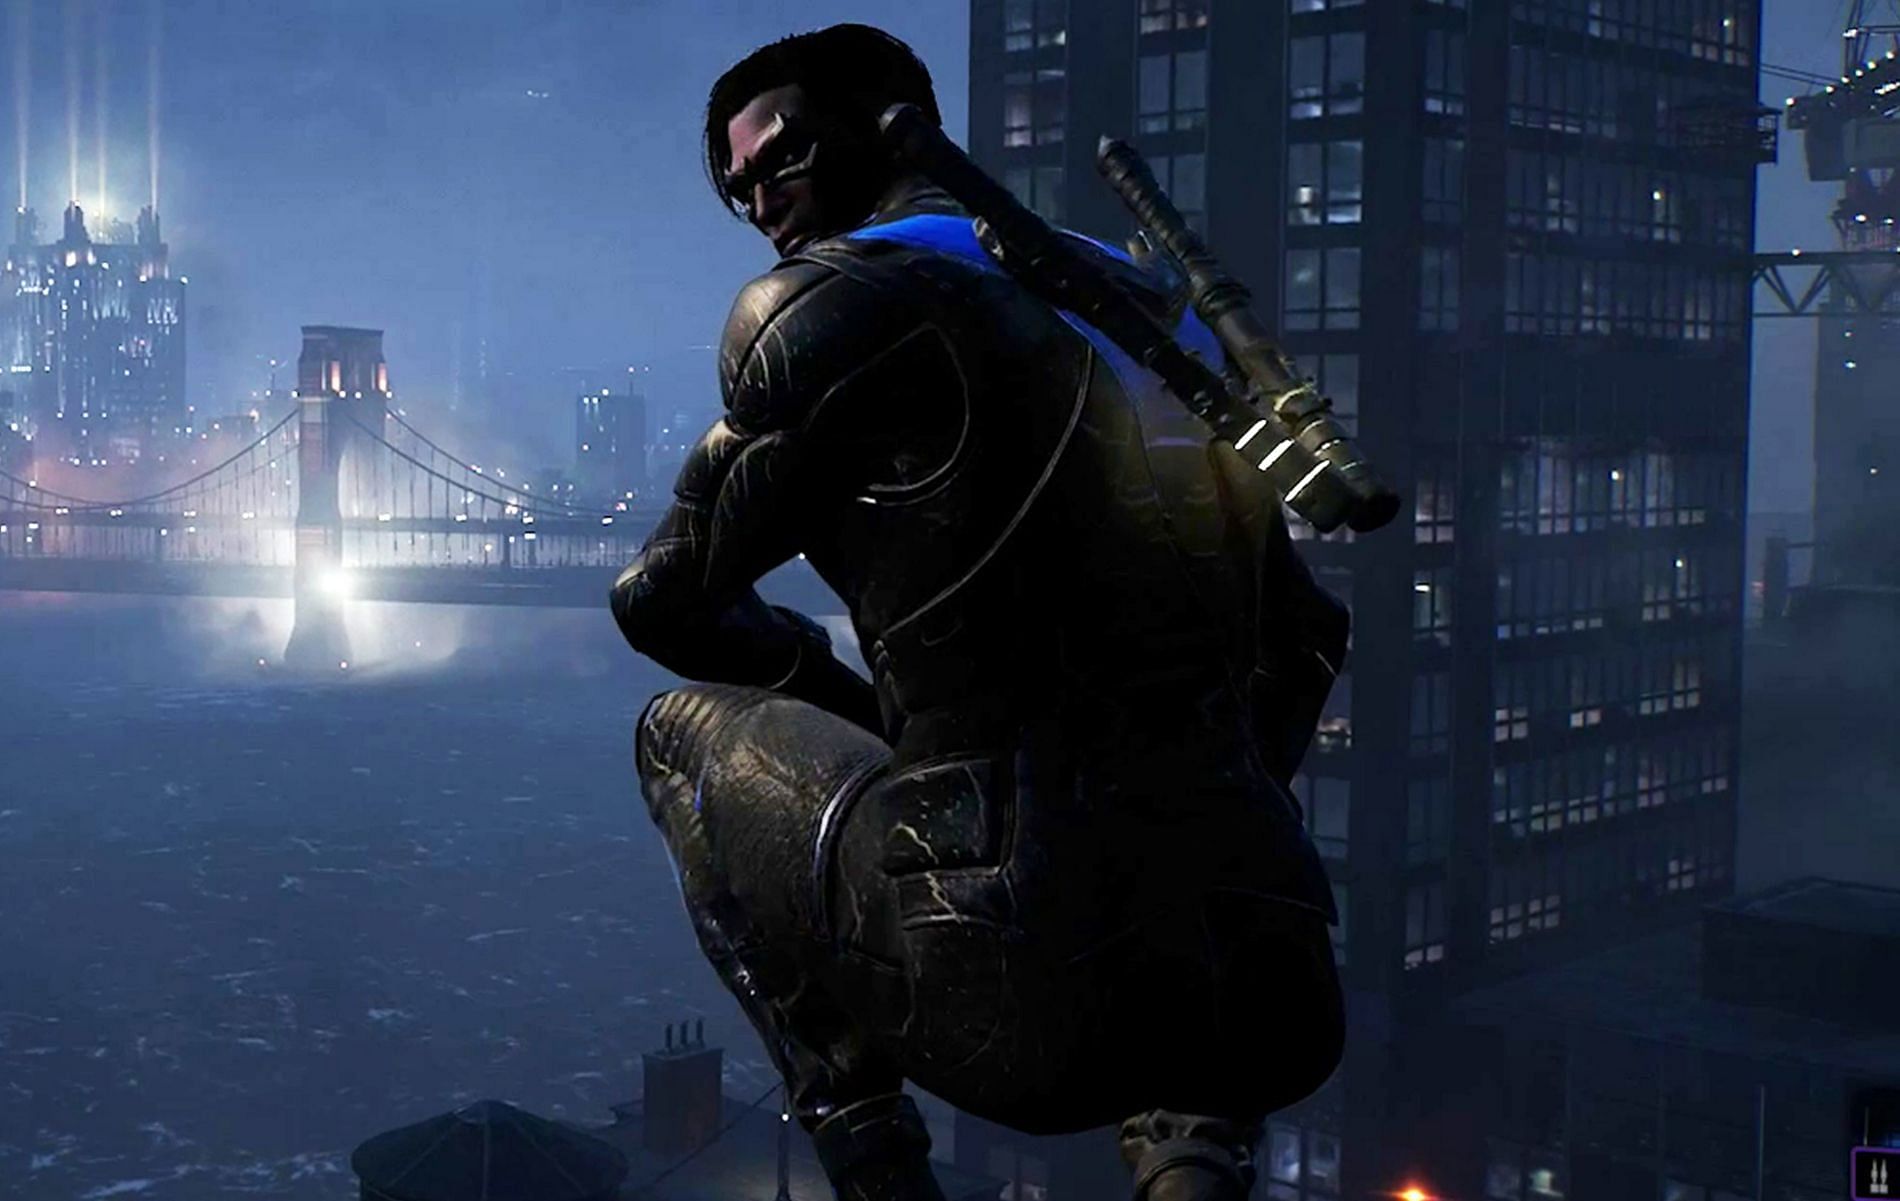 Gotham Knights Walkthrough, Guide, Gameplay, Wiki, and More - News